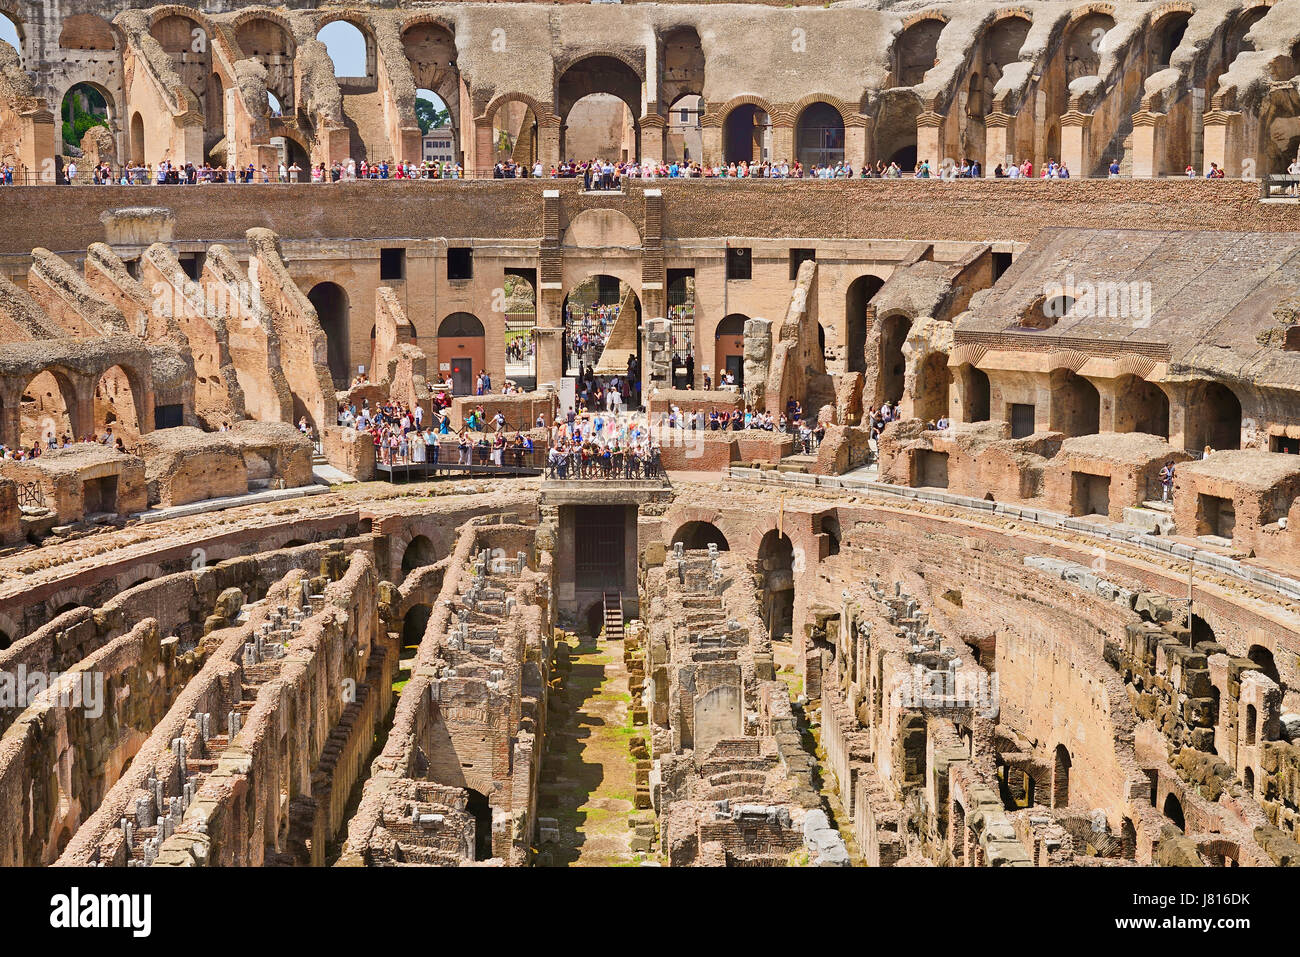 Italy, Rome, The Colosseum amphitheatre built by Emperor Vespasian in AD 80 with the interior thronged with tourists. Stock Photo